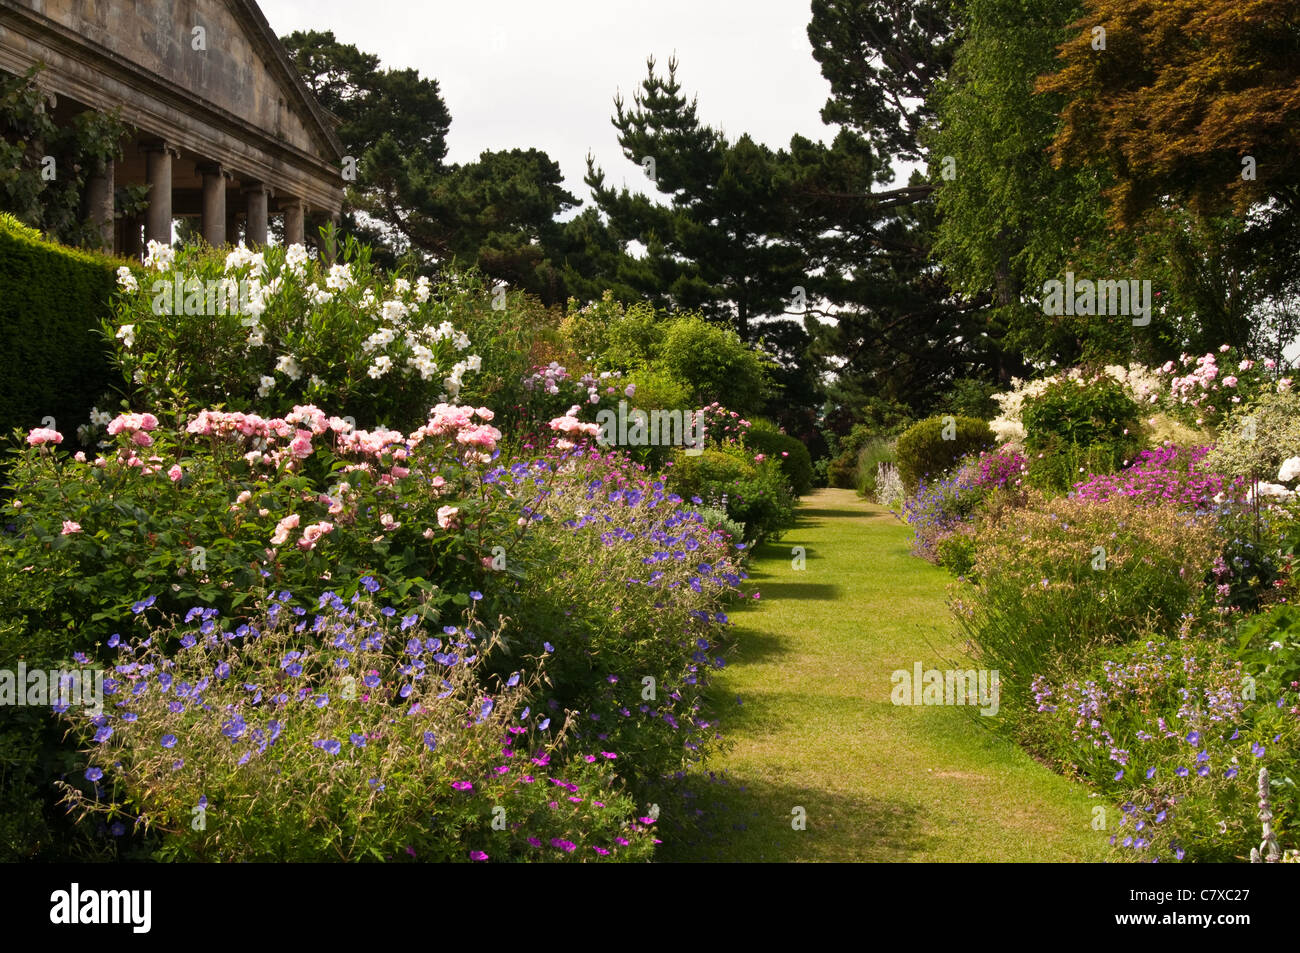 The colourful Wide Border full of summer flowers and lawned pathway at Kiftsgate Court gardens near Chipping Campden, Cotswolds, England Stock Photo